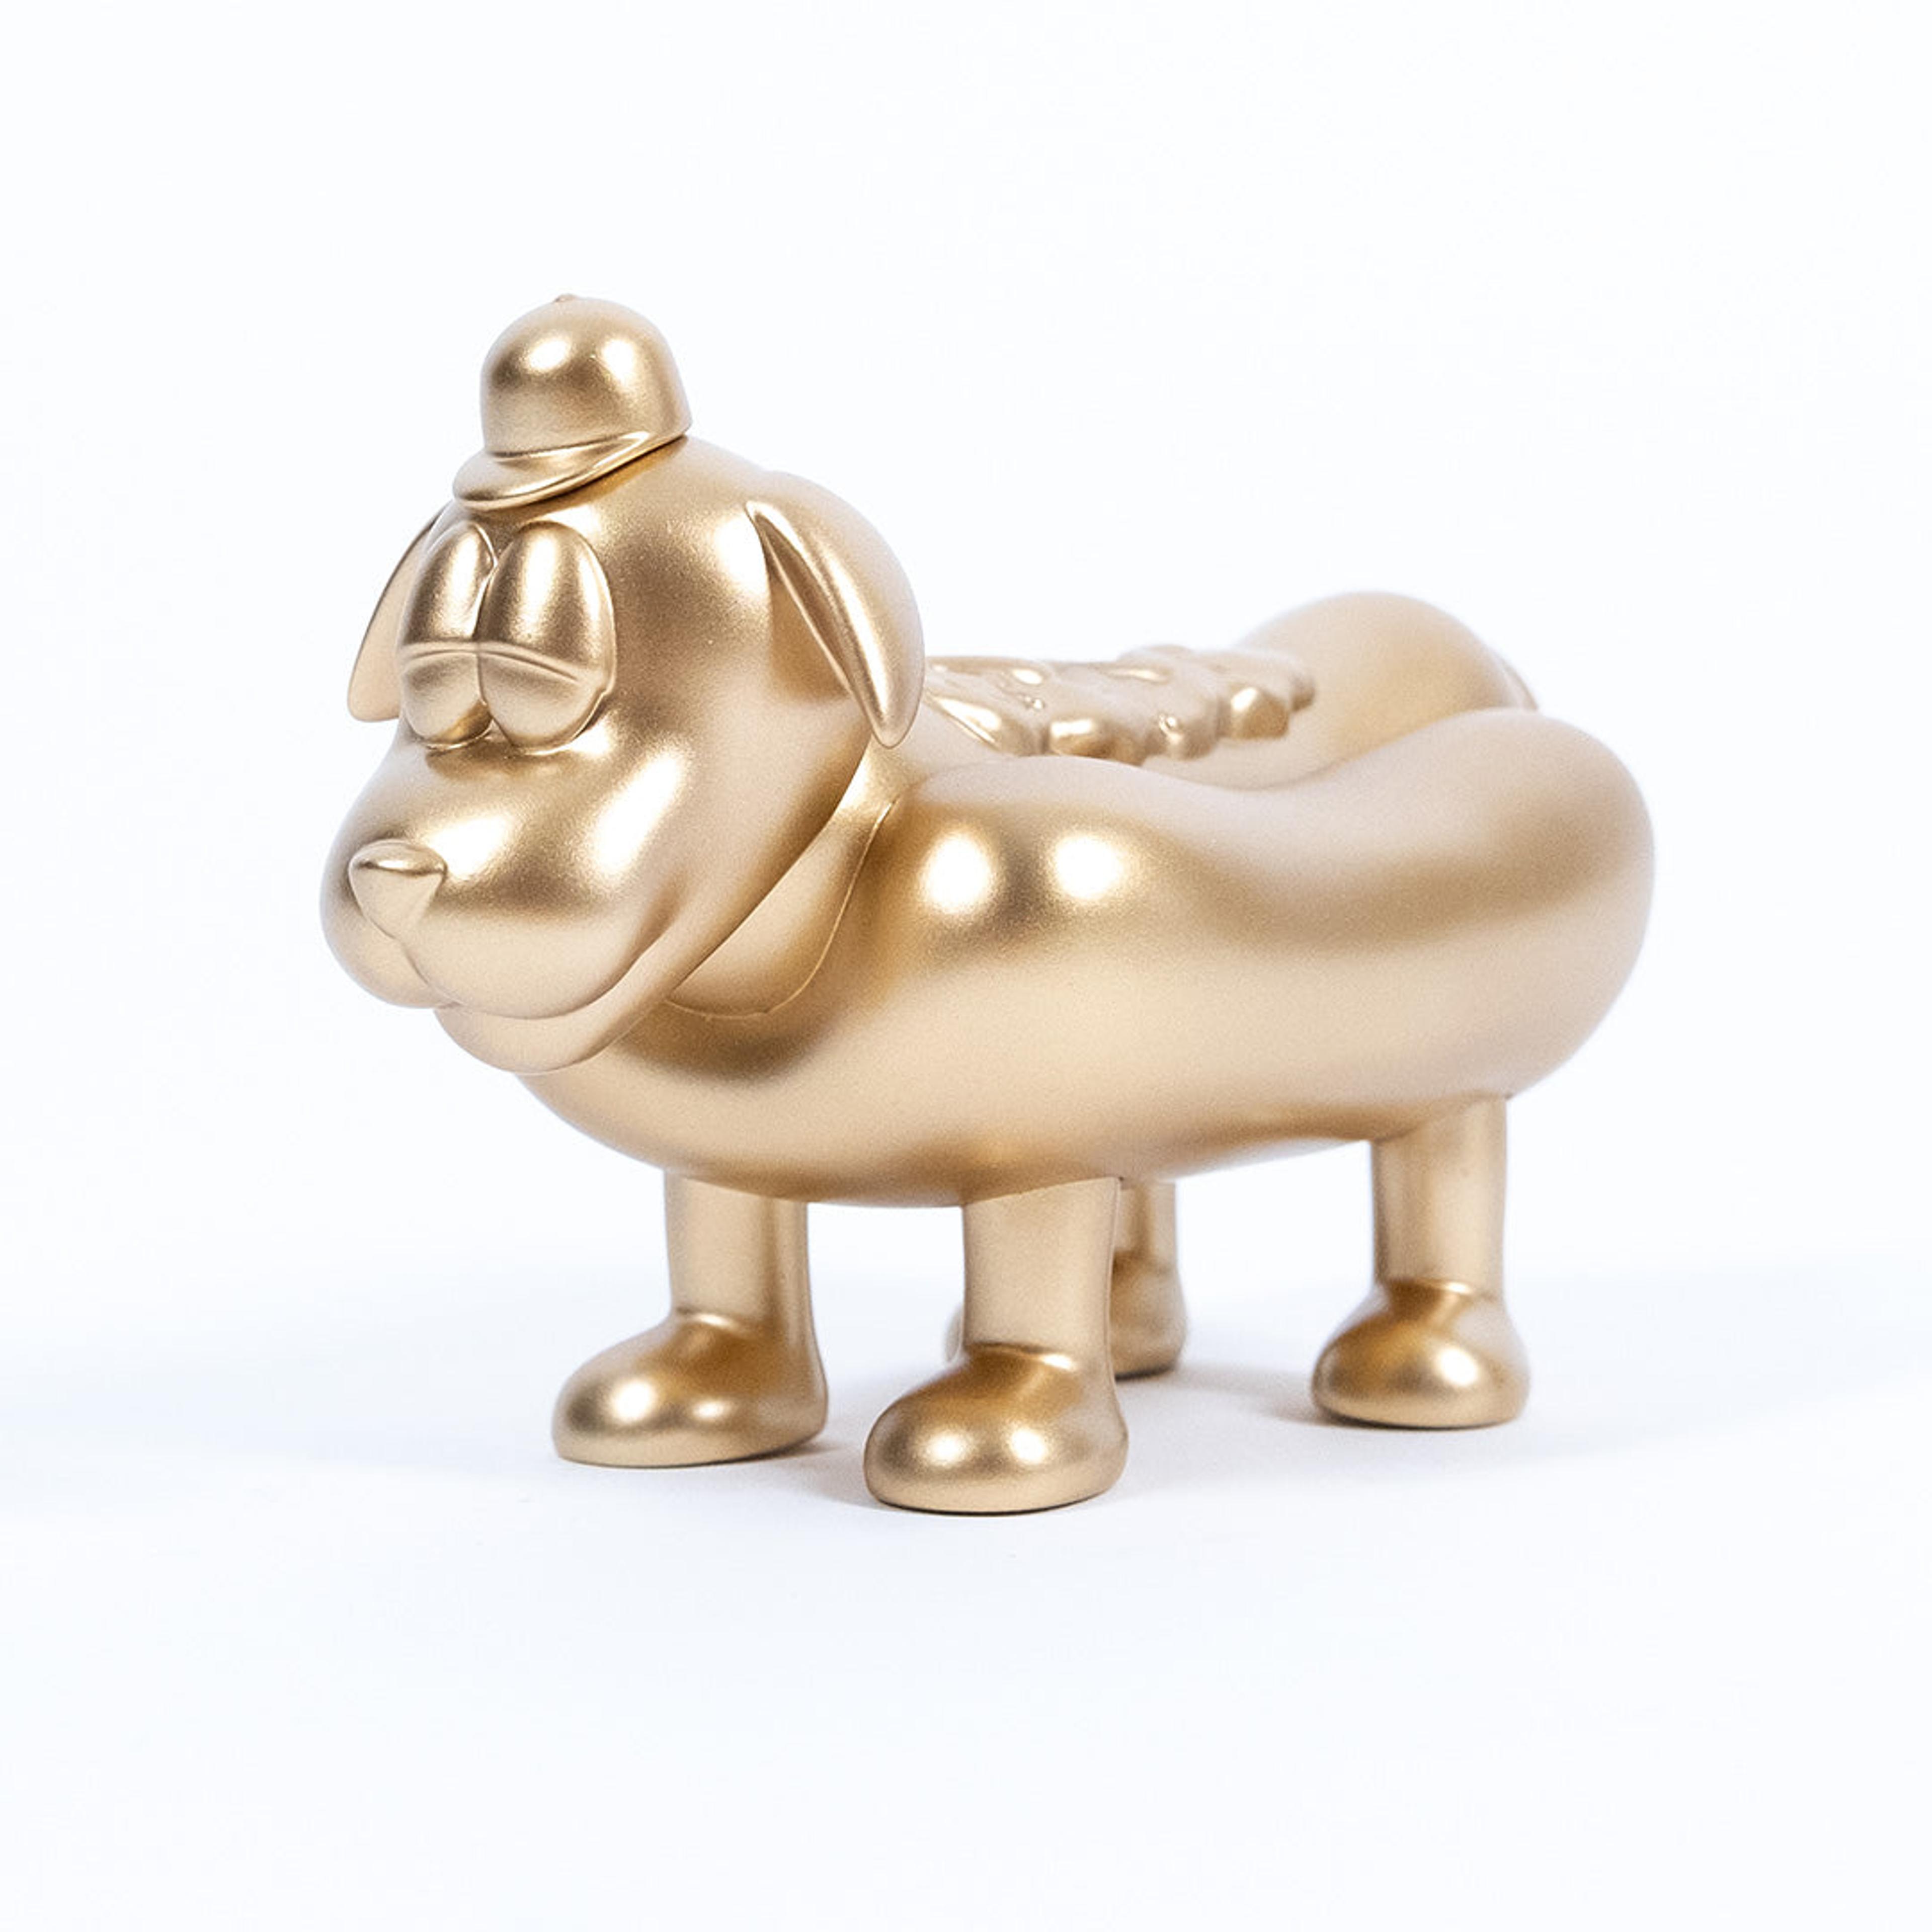 Alternate View 7 of Sheefy Coney Dog Sculpture - Gold